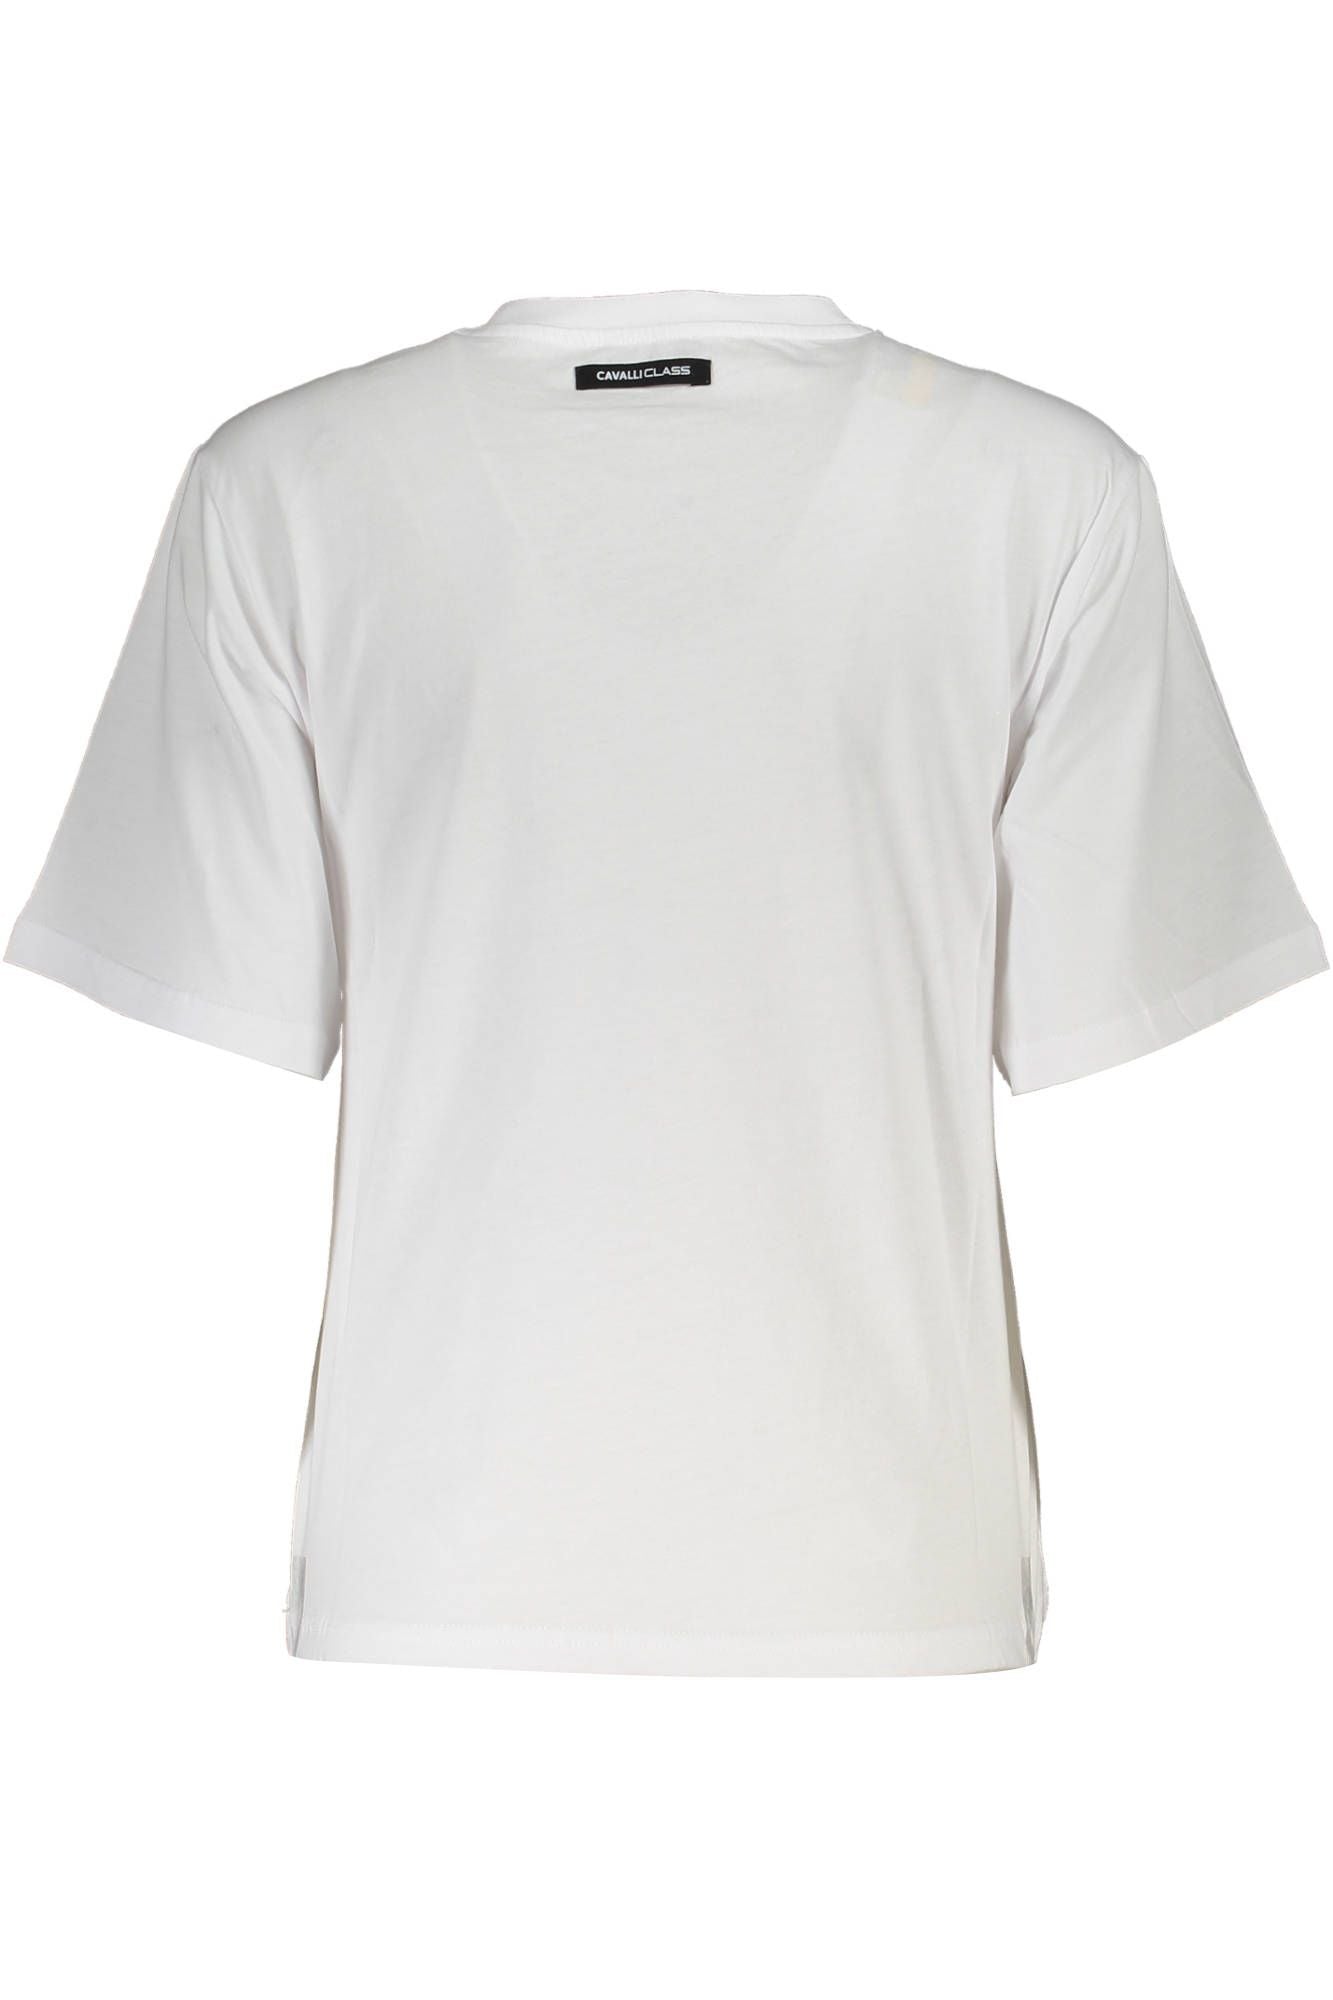 Cavalli Class Chic White Printed Tee with Timeless Elegance